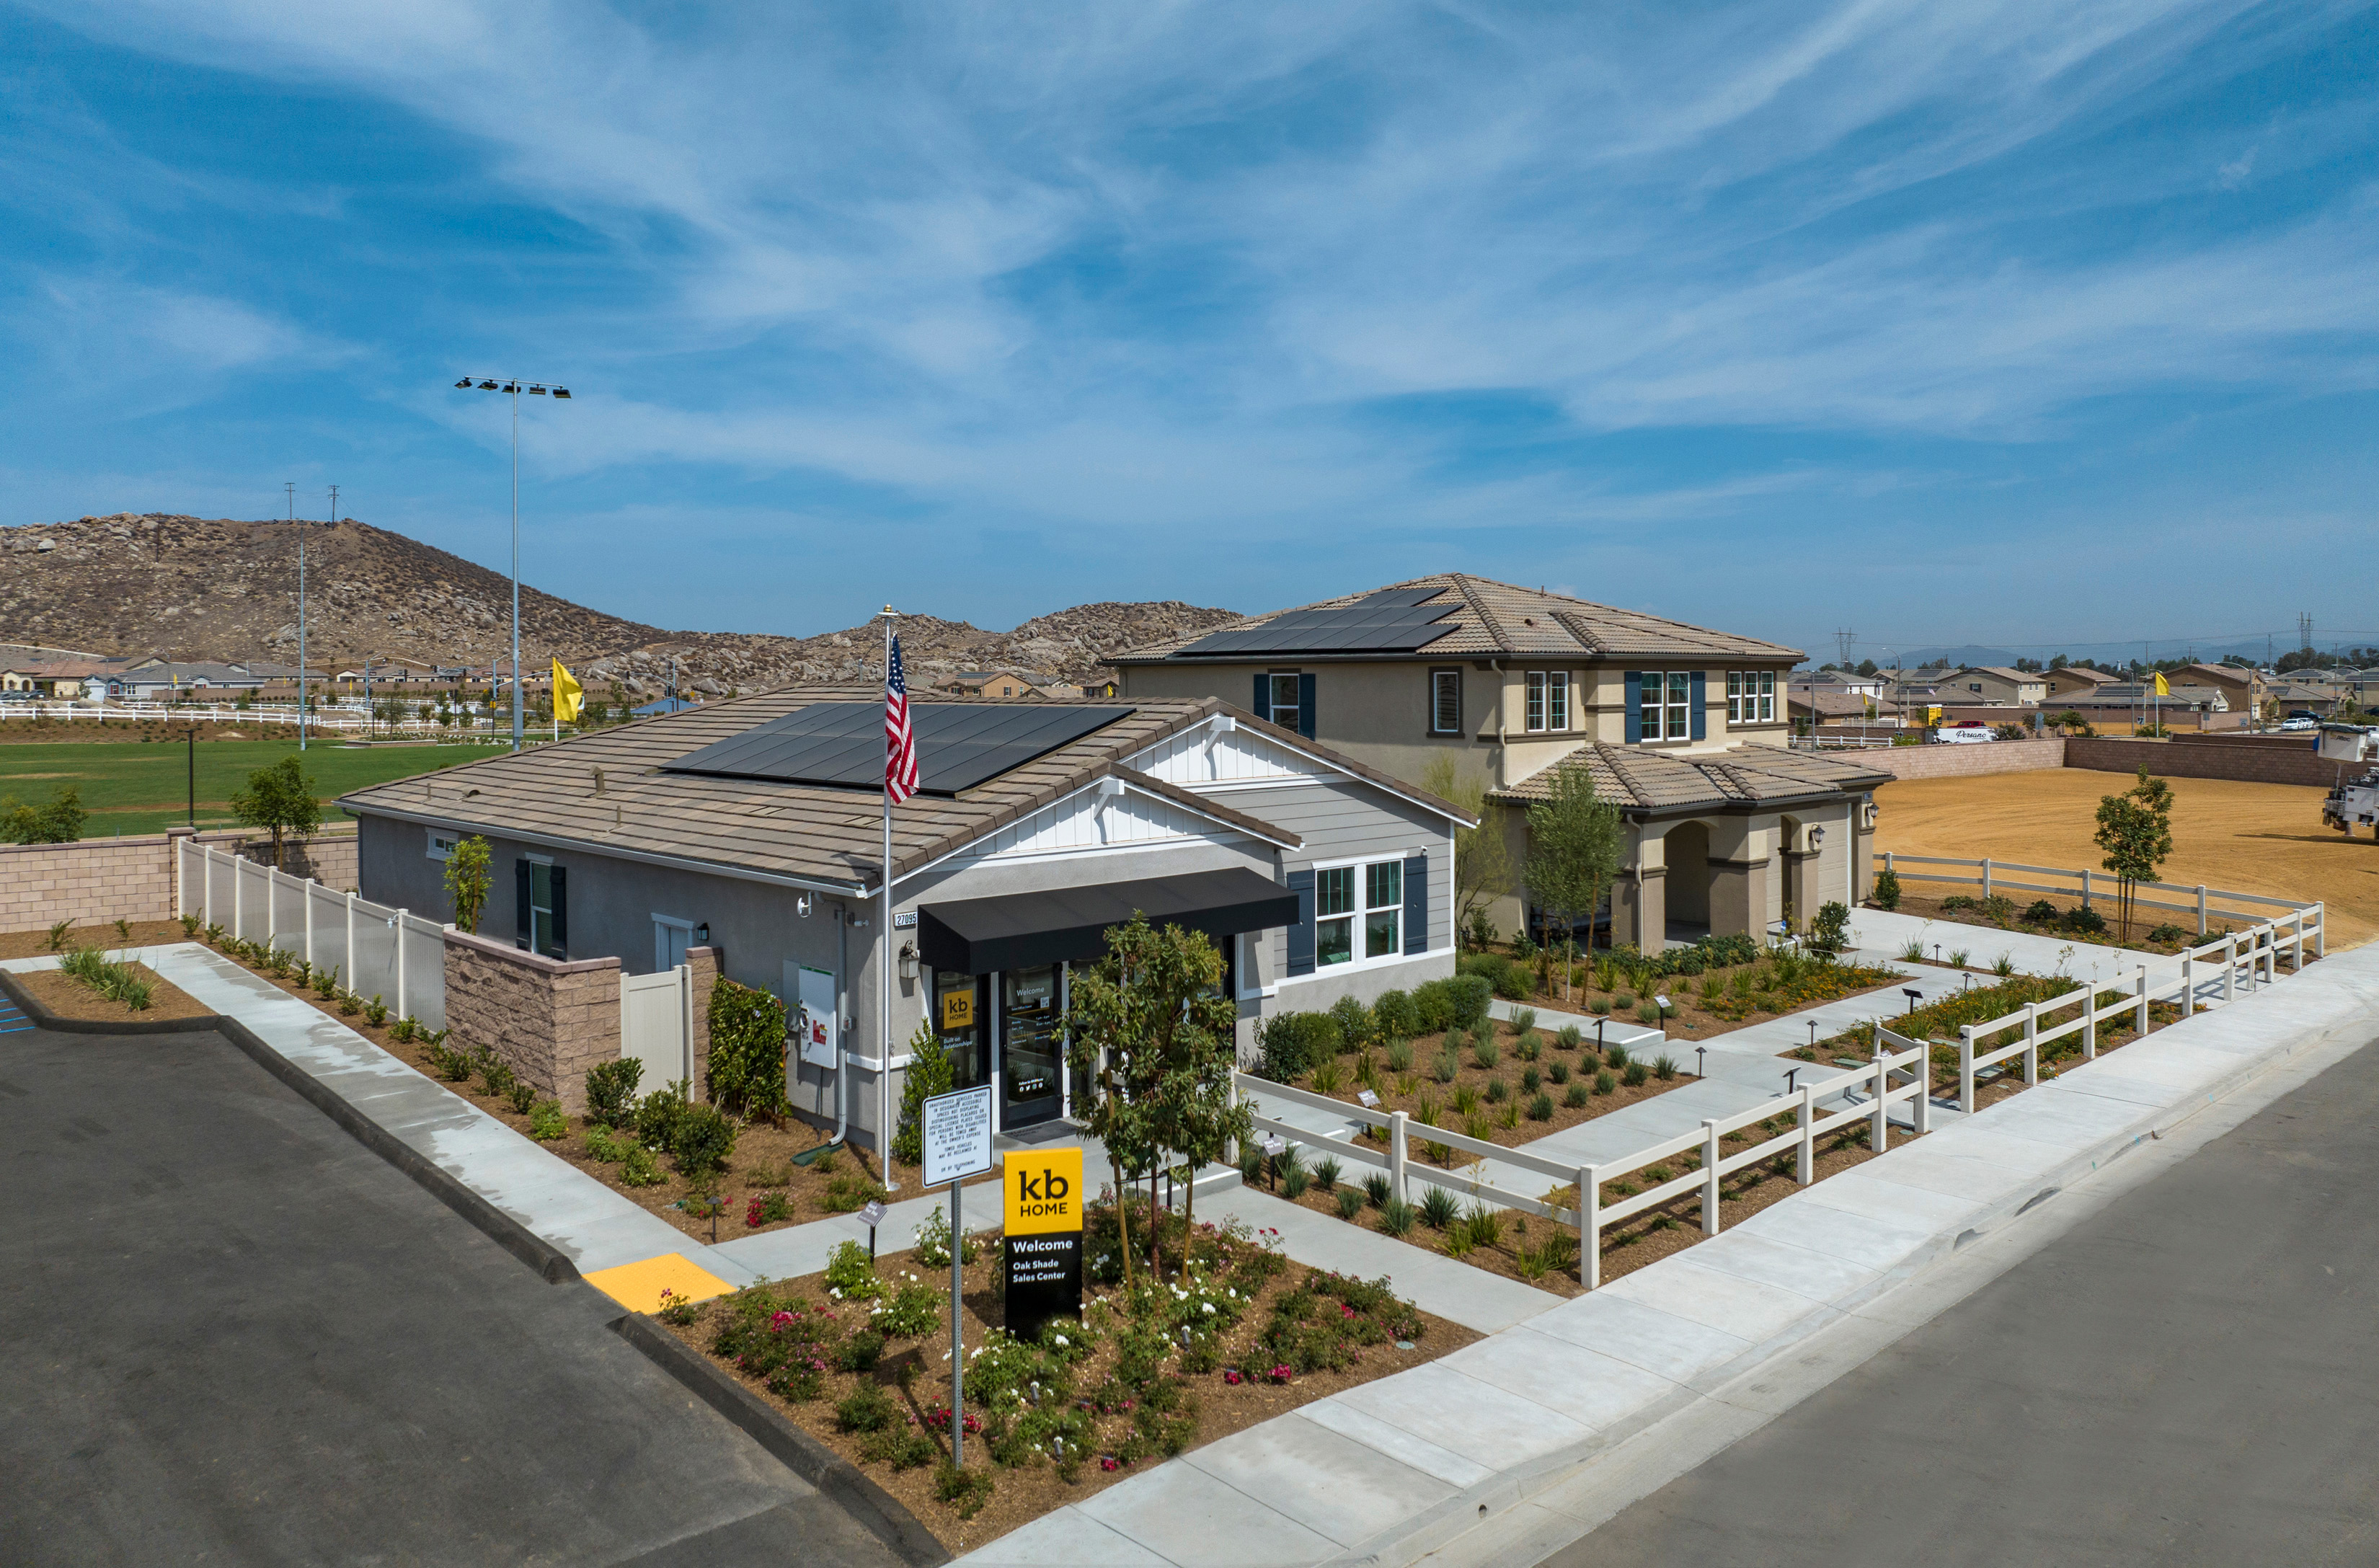 KB Home microgrid community street view in California